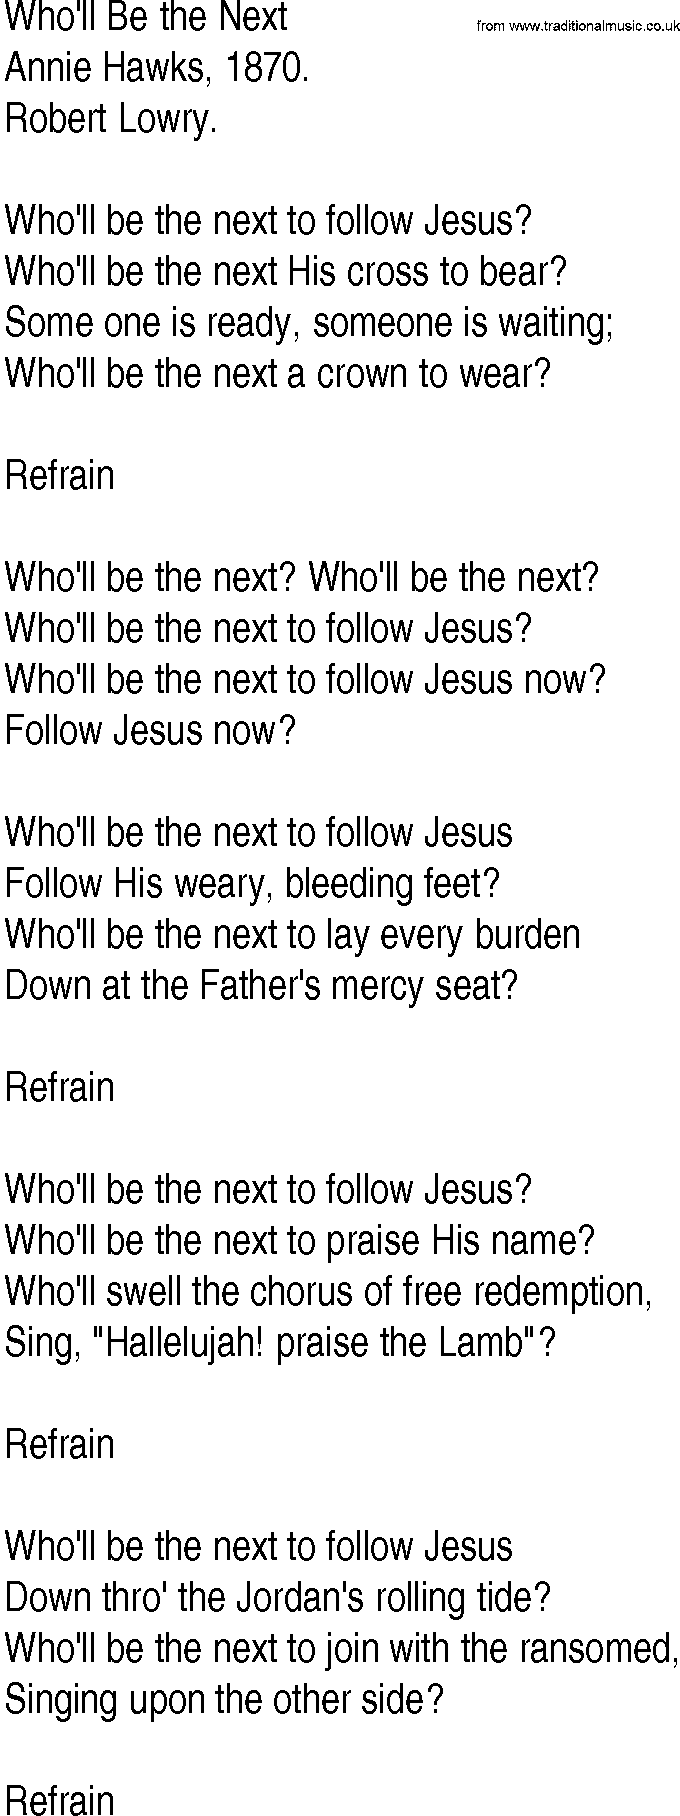 Hymn and Gospel Song: Who'll Be the Next by Annie Hawks lyrics